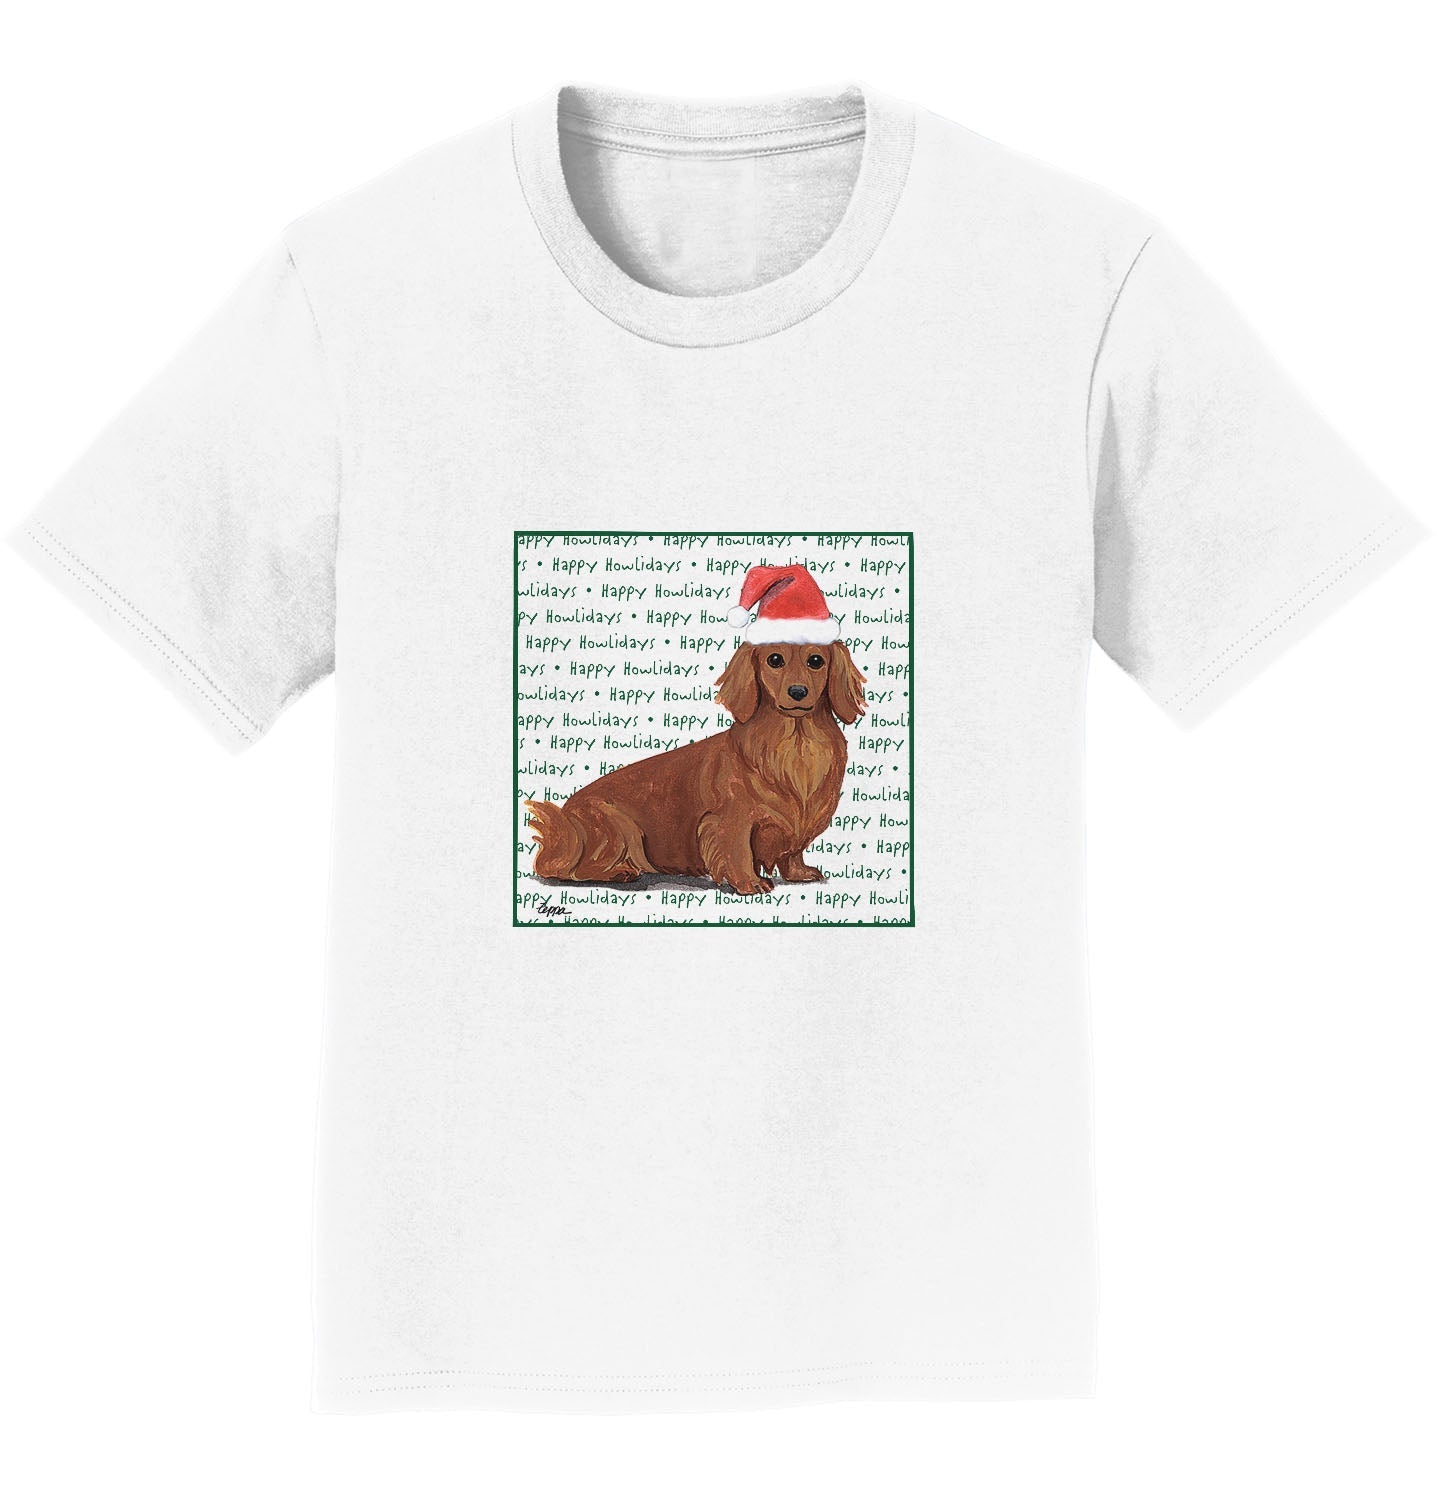 Dachshund (Red Long Haired) Happy Howlidays Text - Kids' Unisex T-Shirt